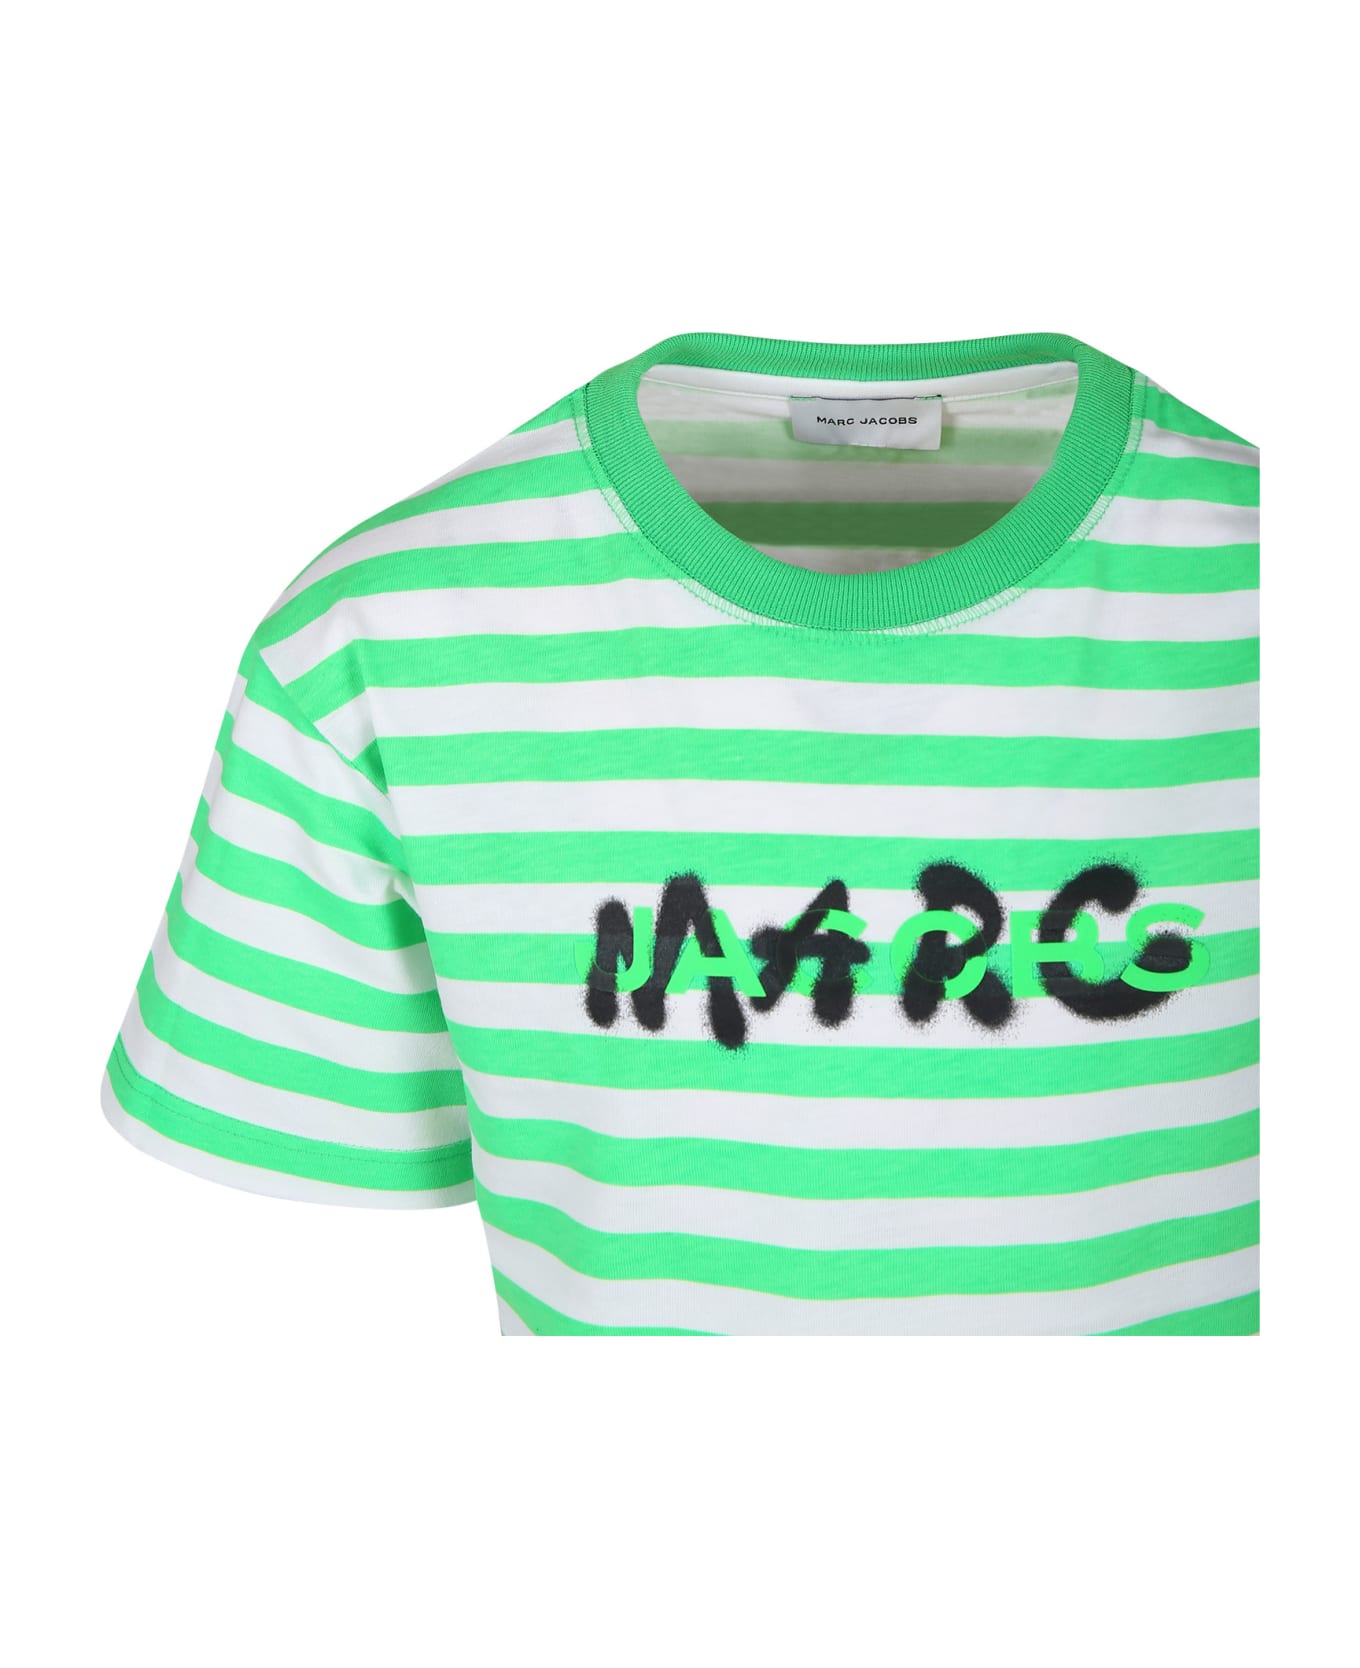 Marc Jacobs Green T-shirt For Kids With Logo - Green